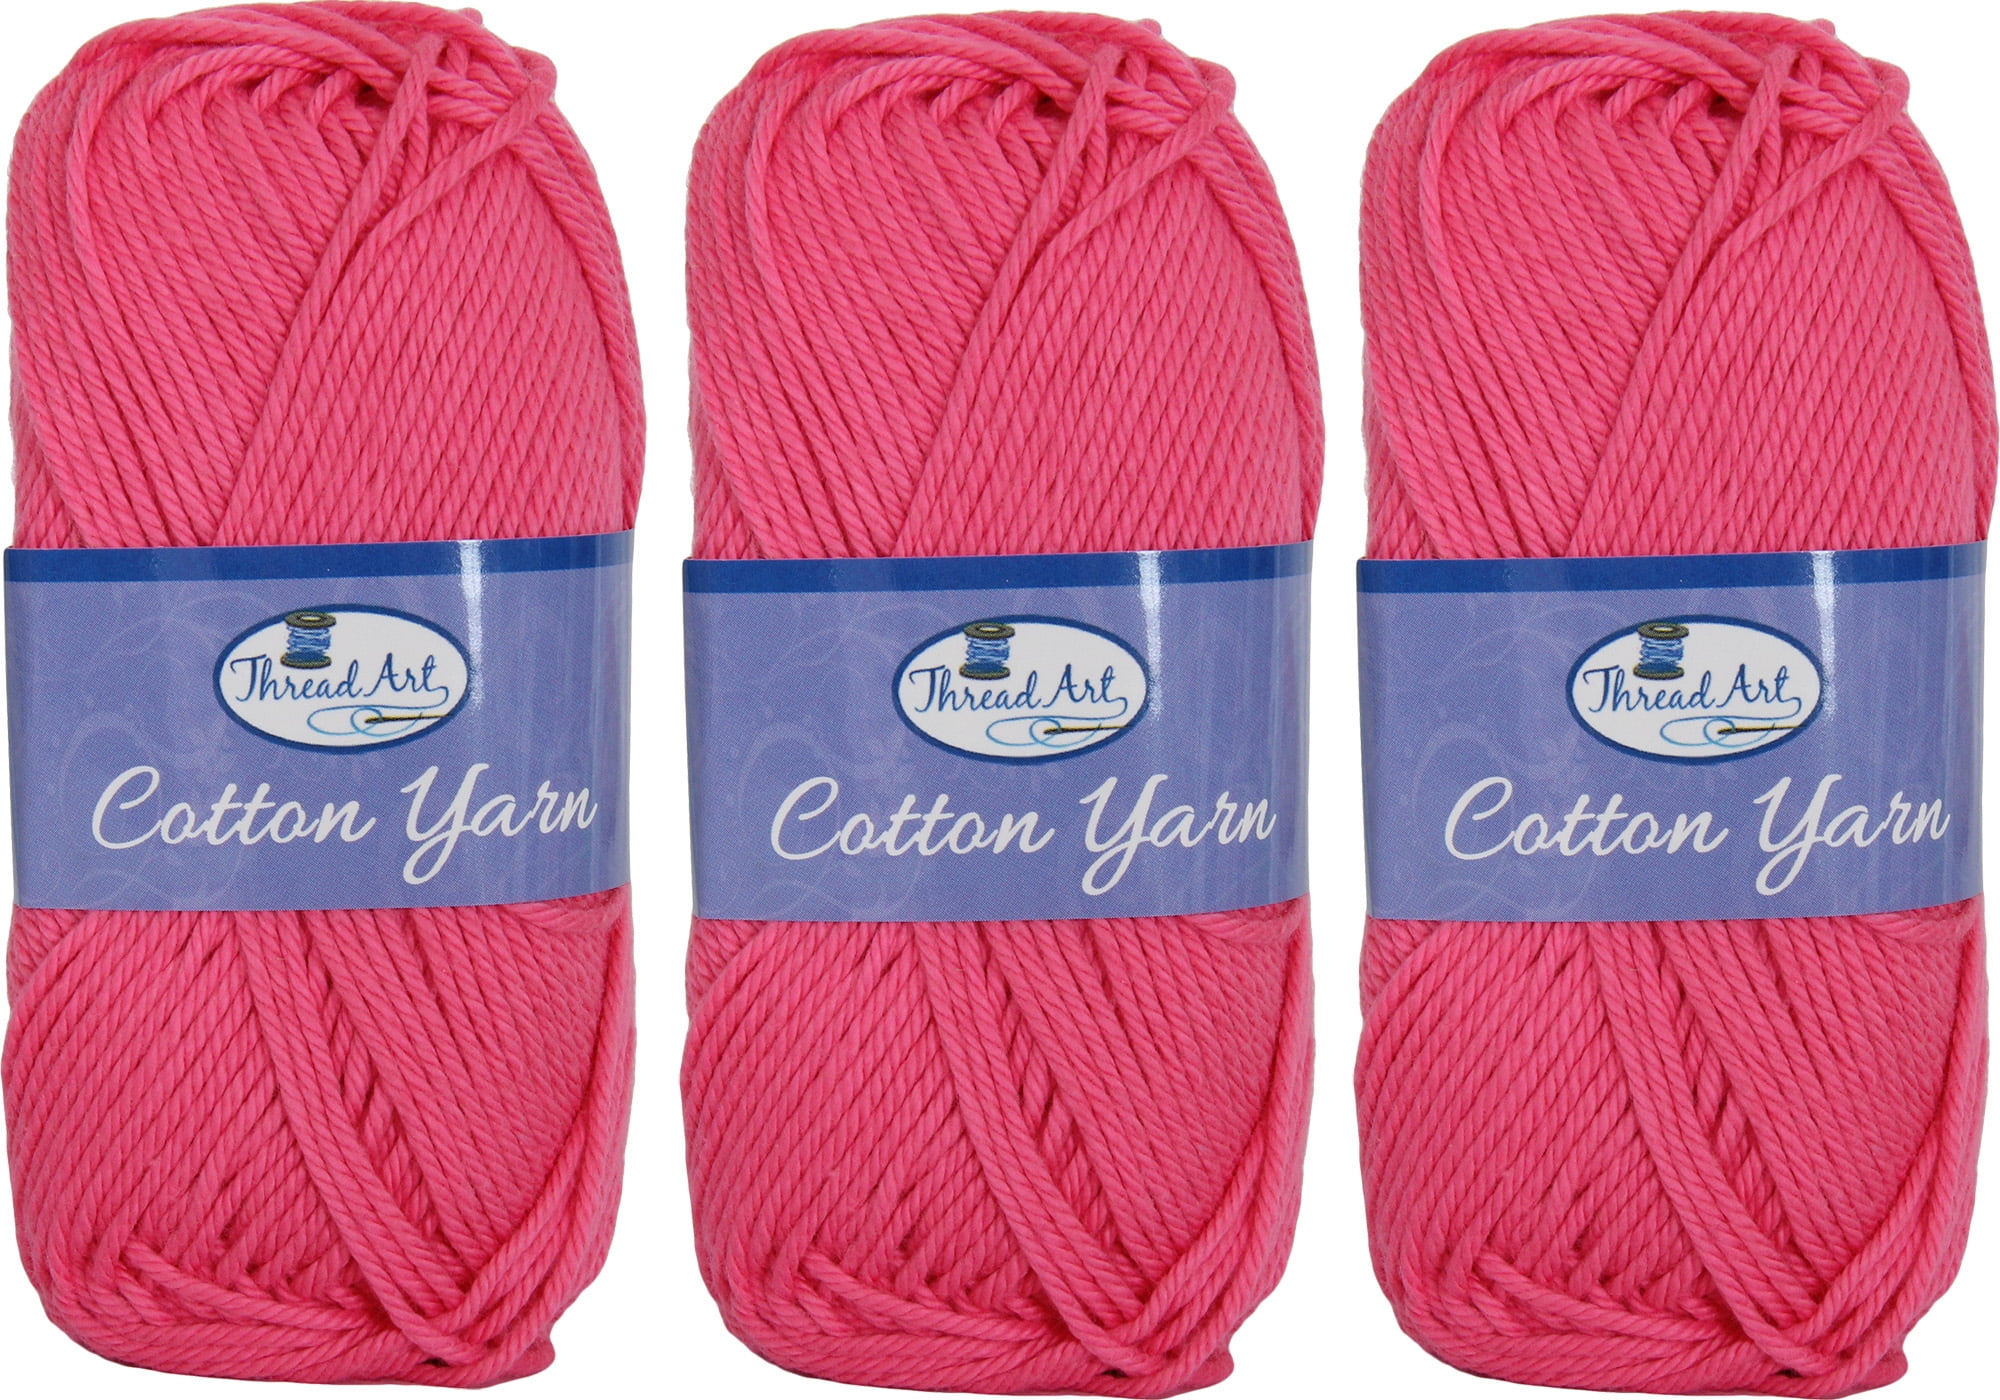 3 Pack of 100% Pure Cotton Crochet Yarn by Threadart | Natural | 50 gram  Skeins | Worsted Medium #4 Yarn | 85 yds per Skein - 30 Colors Available